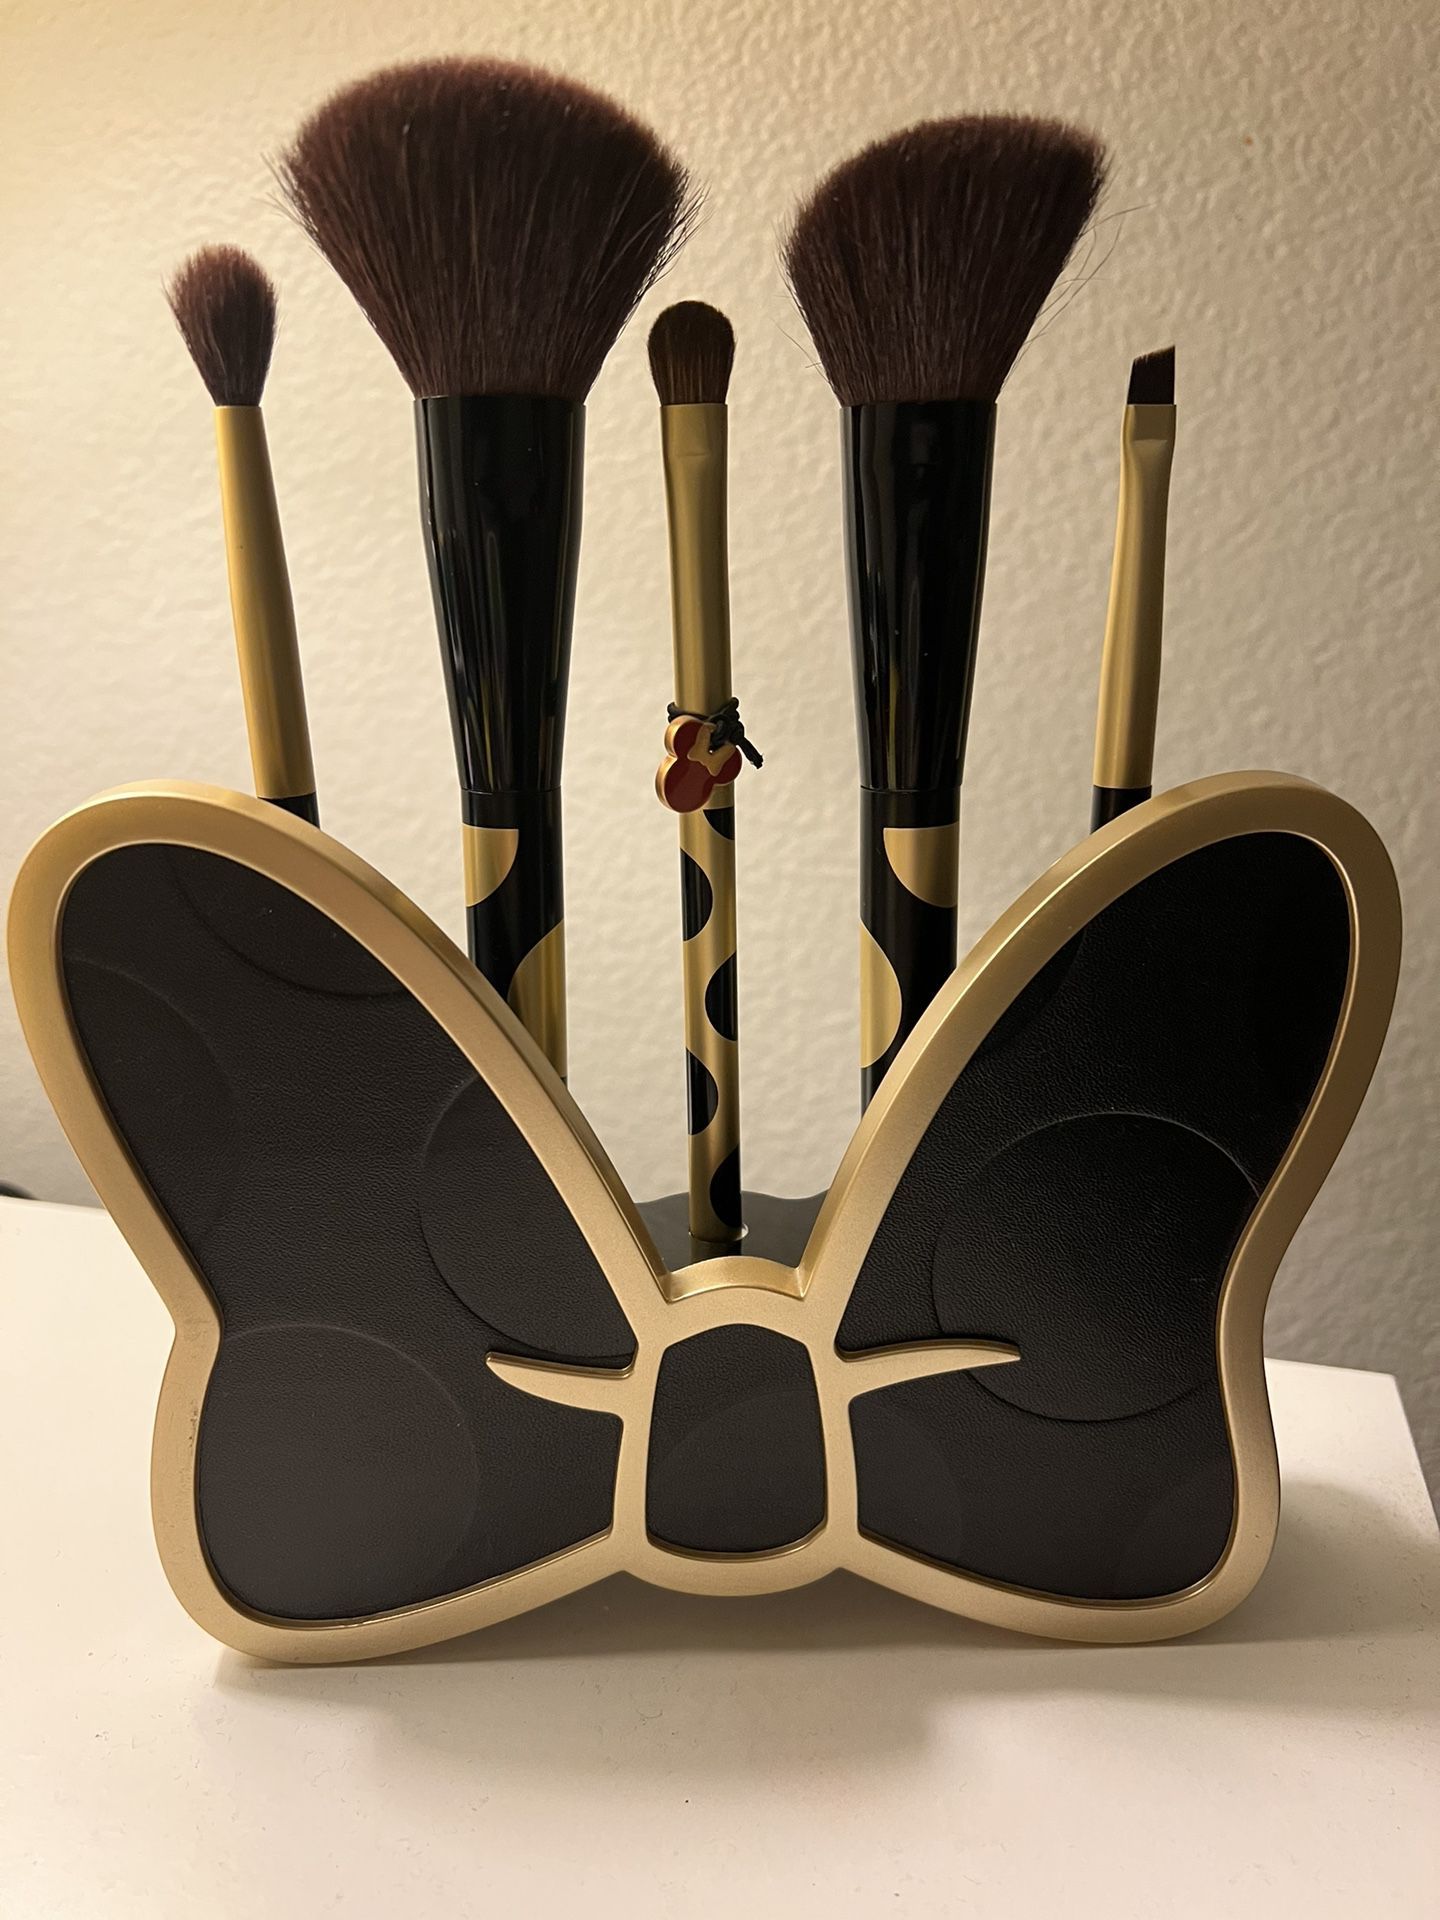 Sephora Minnie Mouse Brush Set With Stand